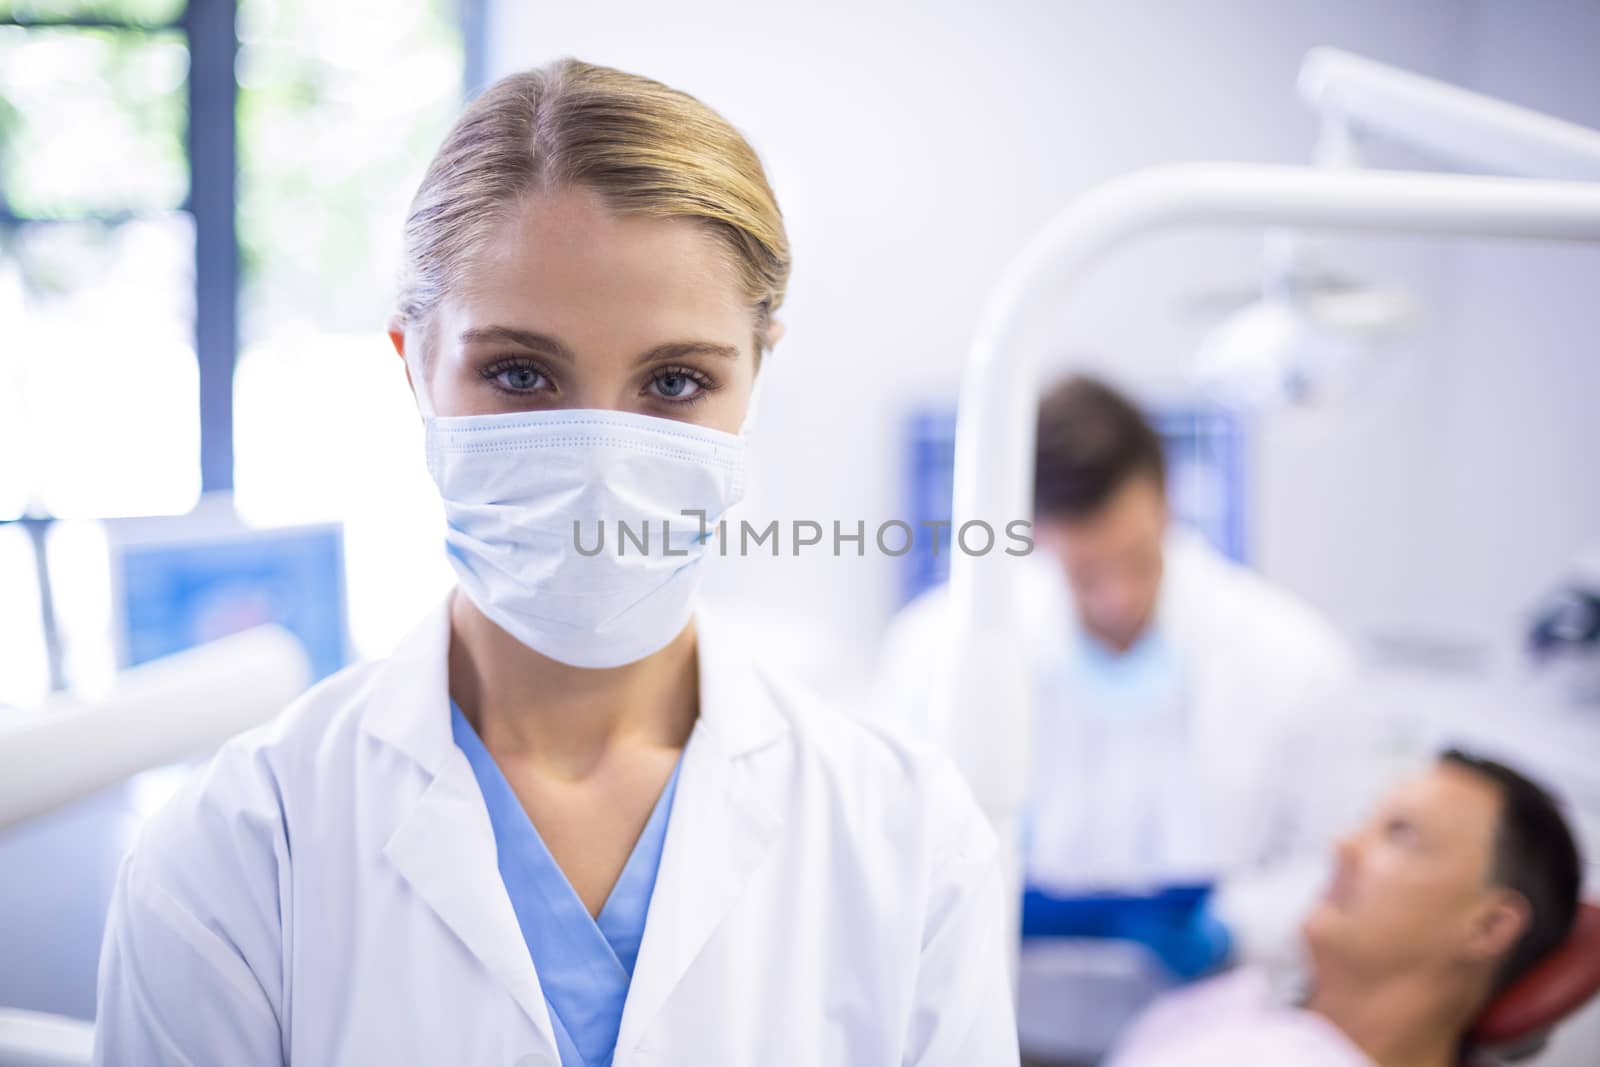 Portrait of dentist wearing surgical mask while her colleague examining patient in background